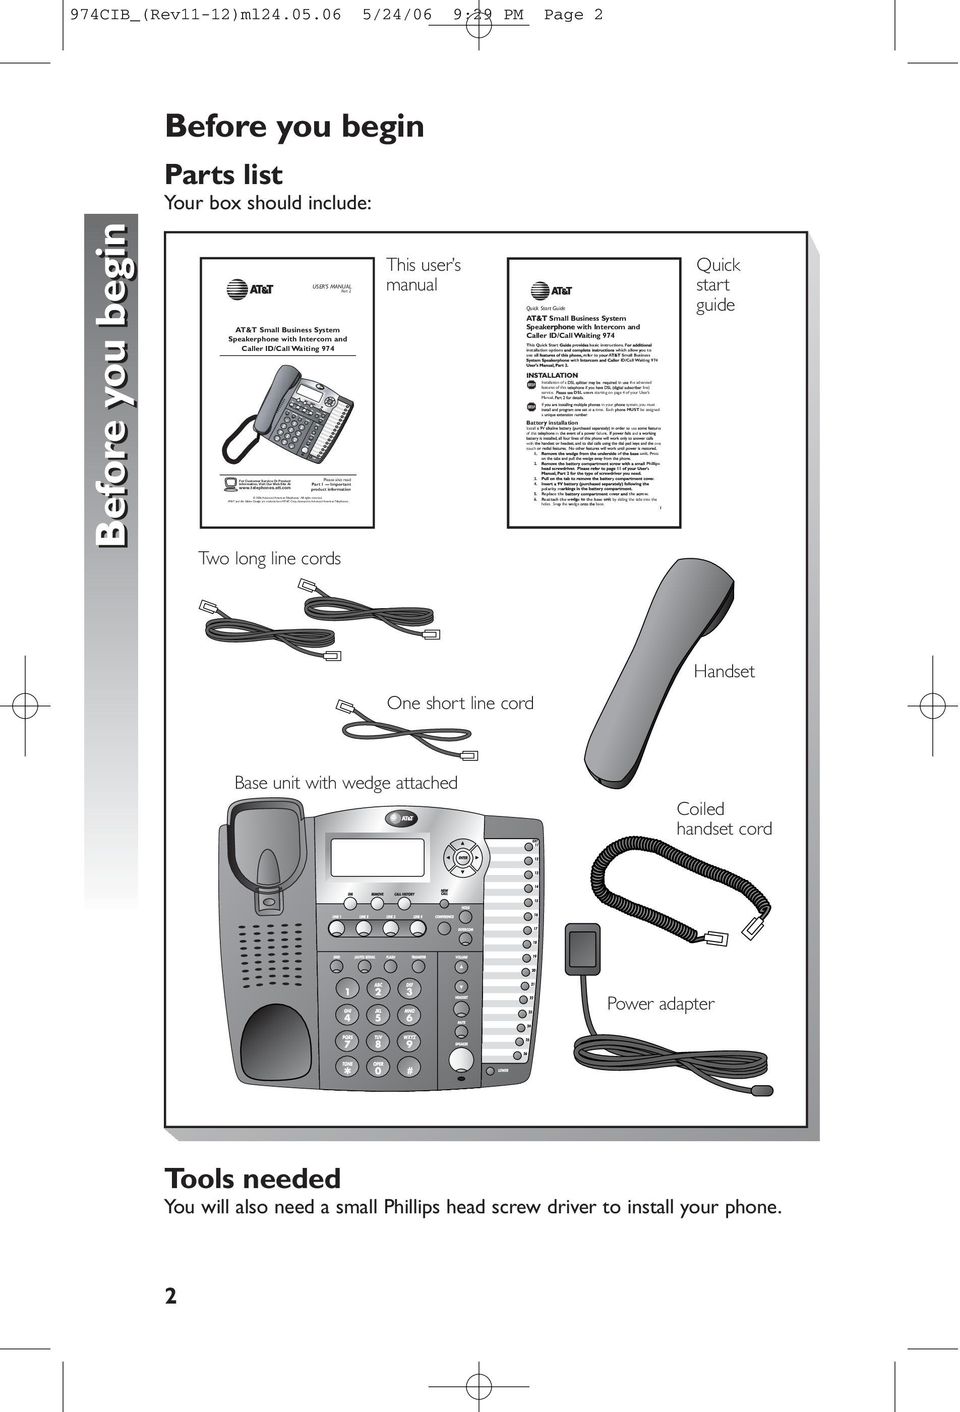 Intercom and Caller ID/Call Waiting 974 Information, Visit Our Web Site At www.telephones.att.com Please also read Part 1 Important product information 2006 Advanced American Telephones.